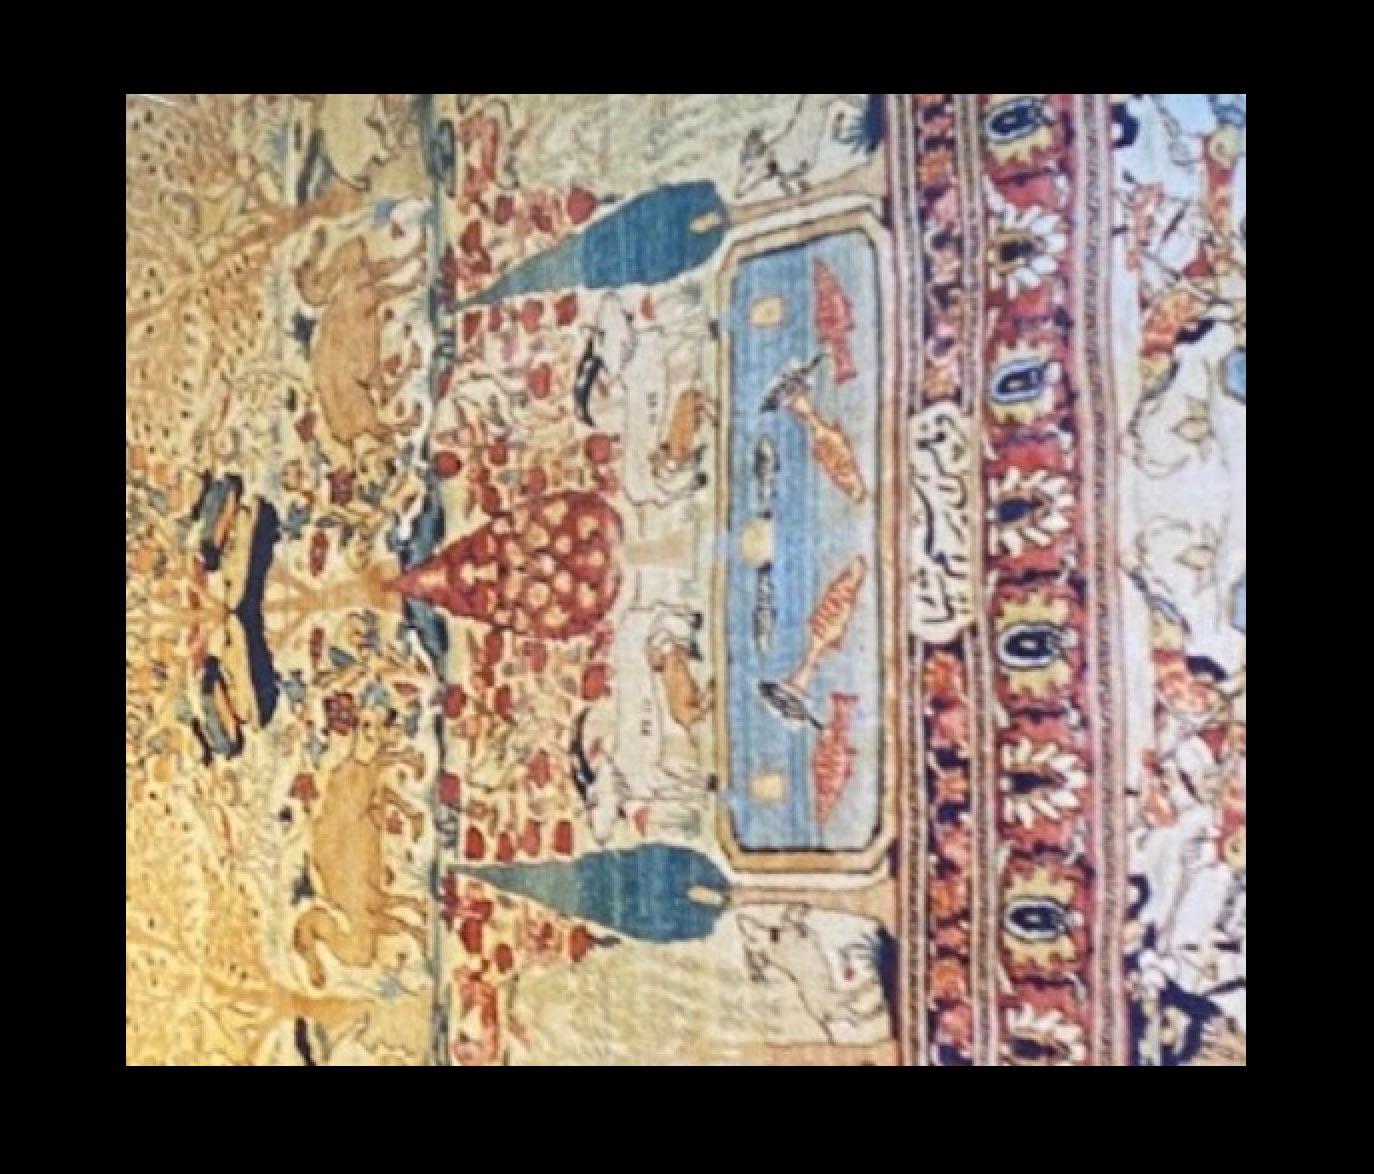 Exceptional natural dyes and drawings

Persian epic mythology & 19th century world leaders

Provenance: Balour Rugs

